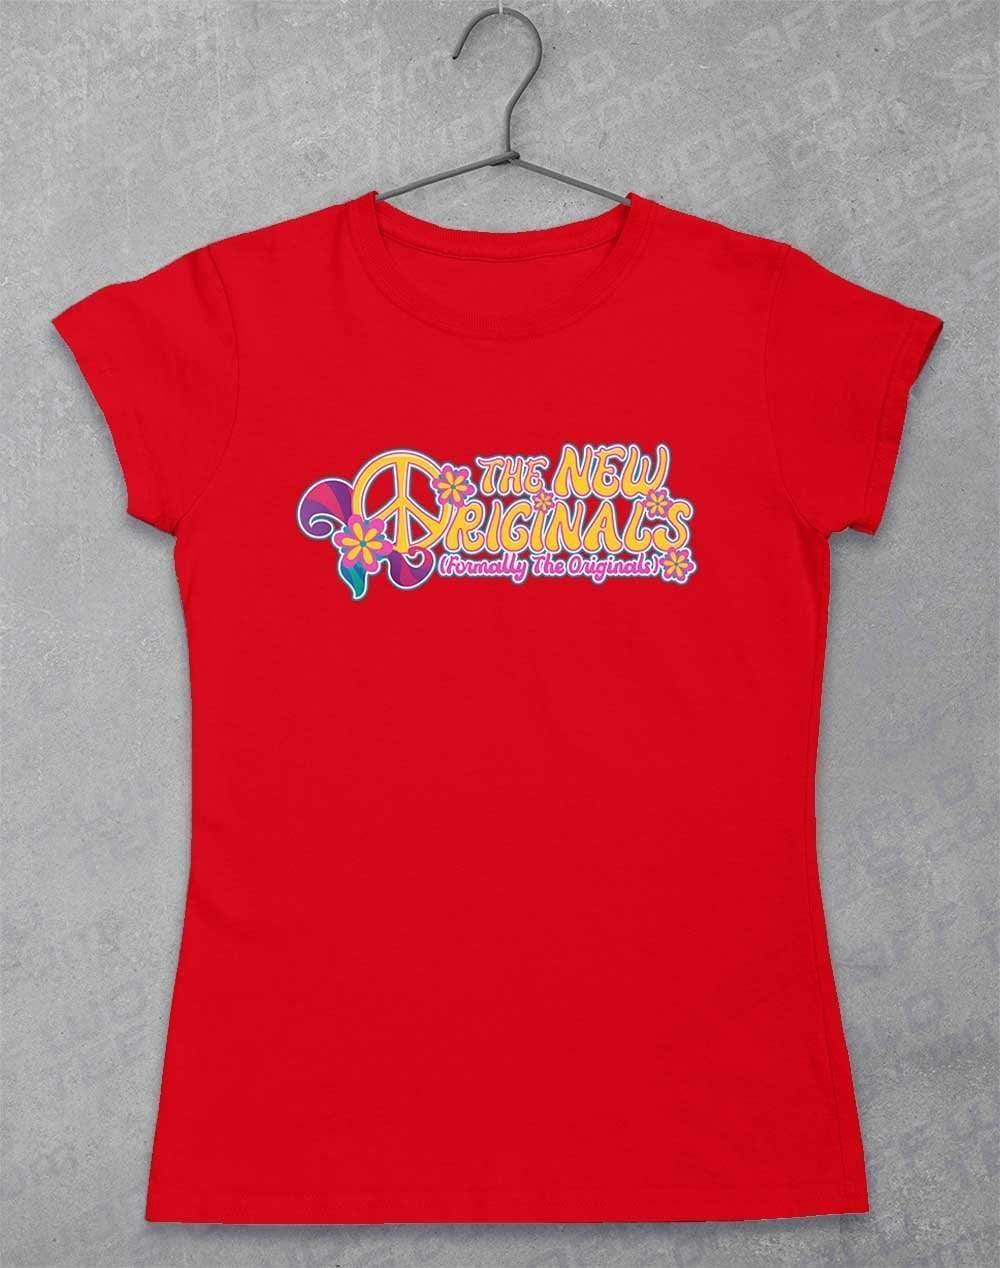 The New Originals Womens T-Shirt 8-10 / Red  - Off World Tees